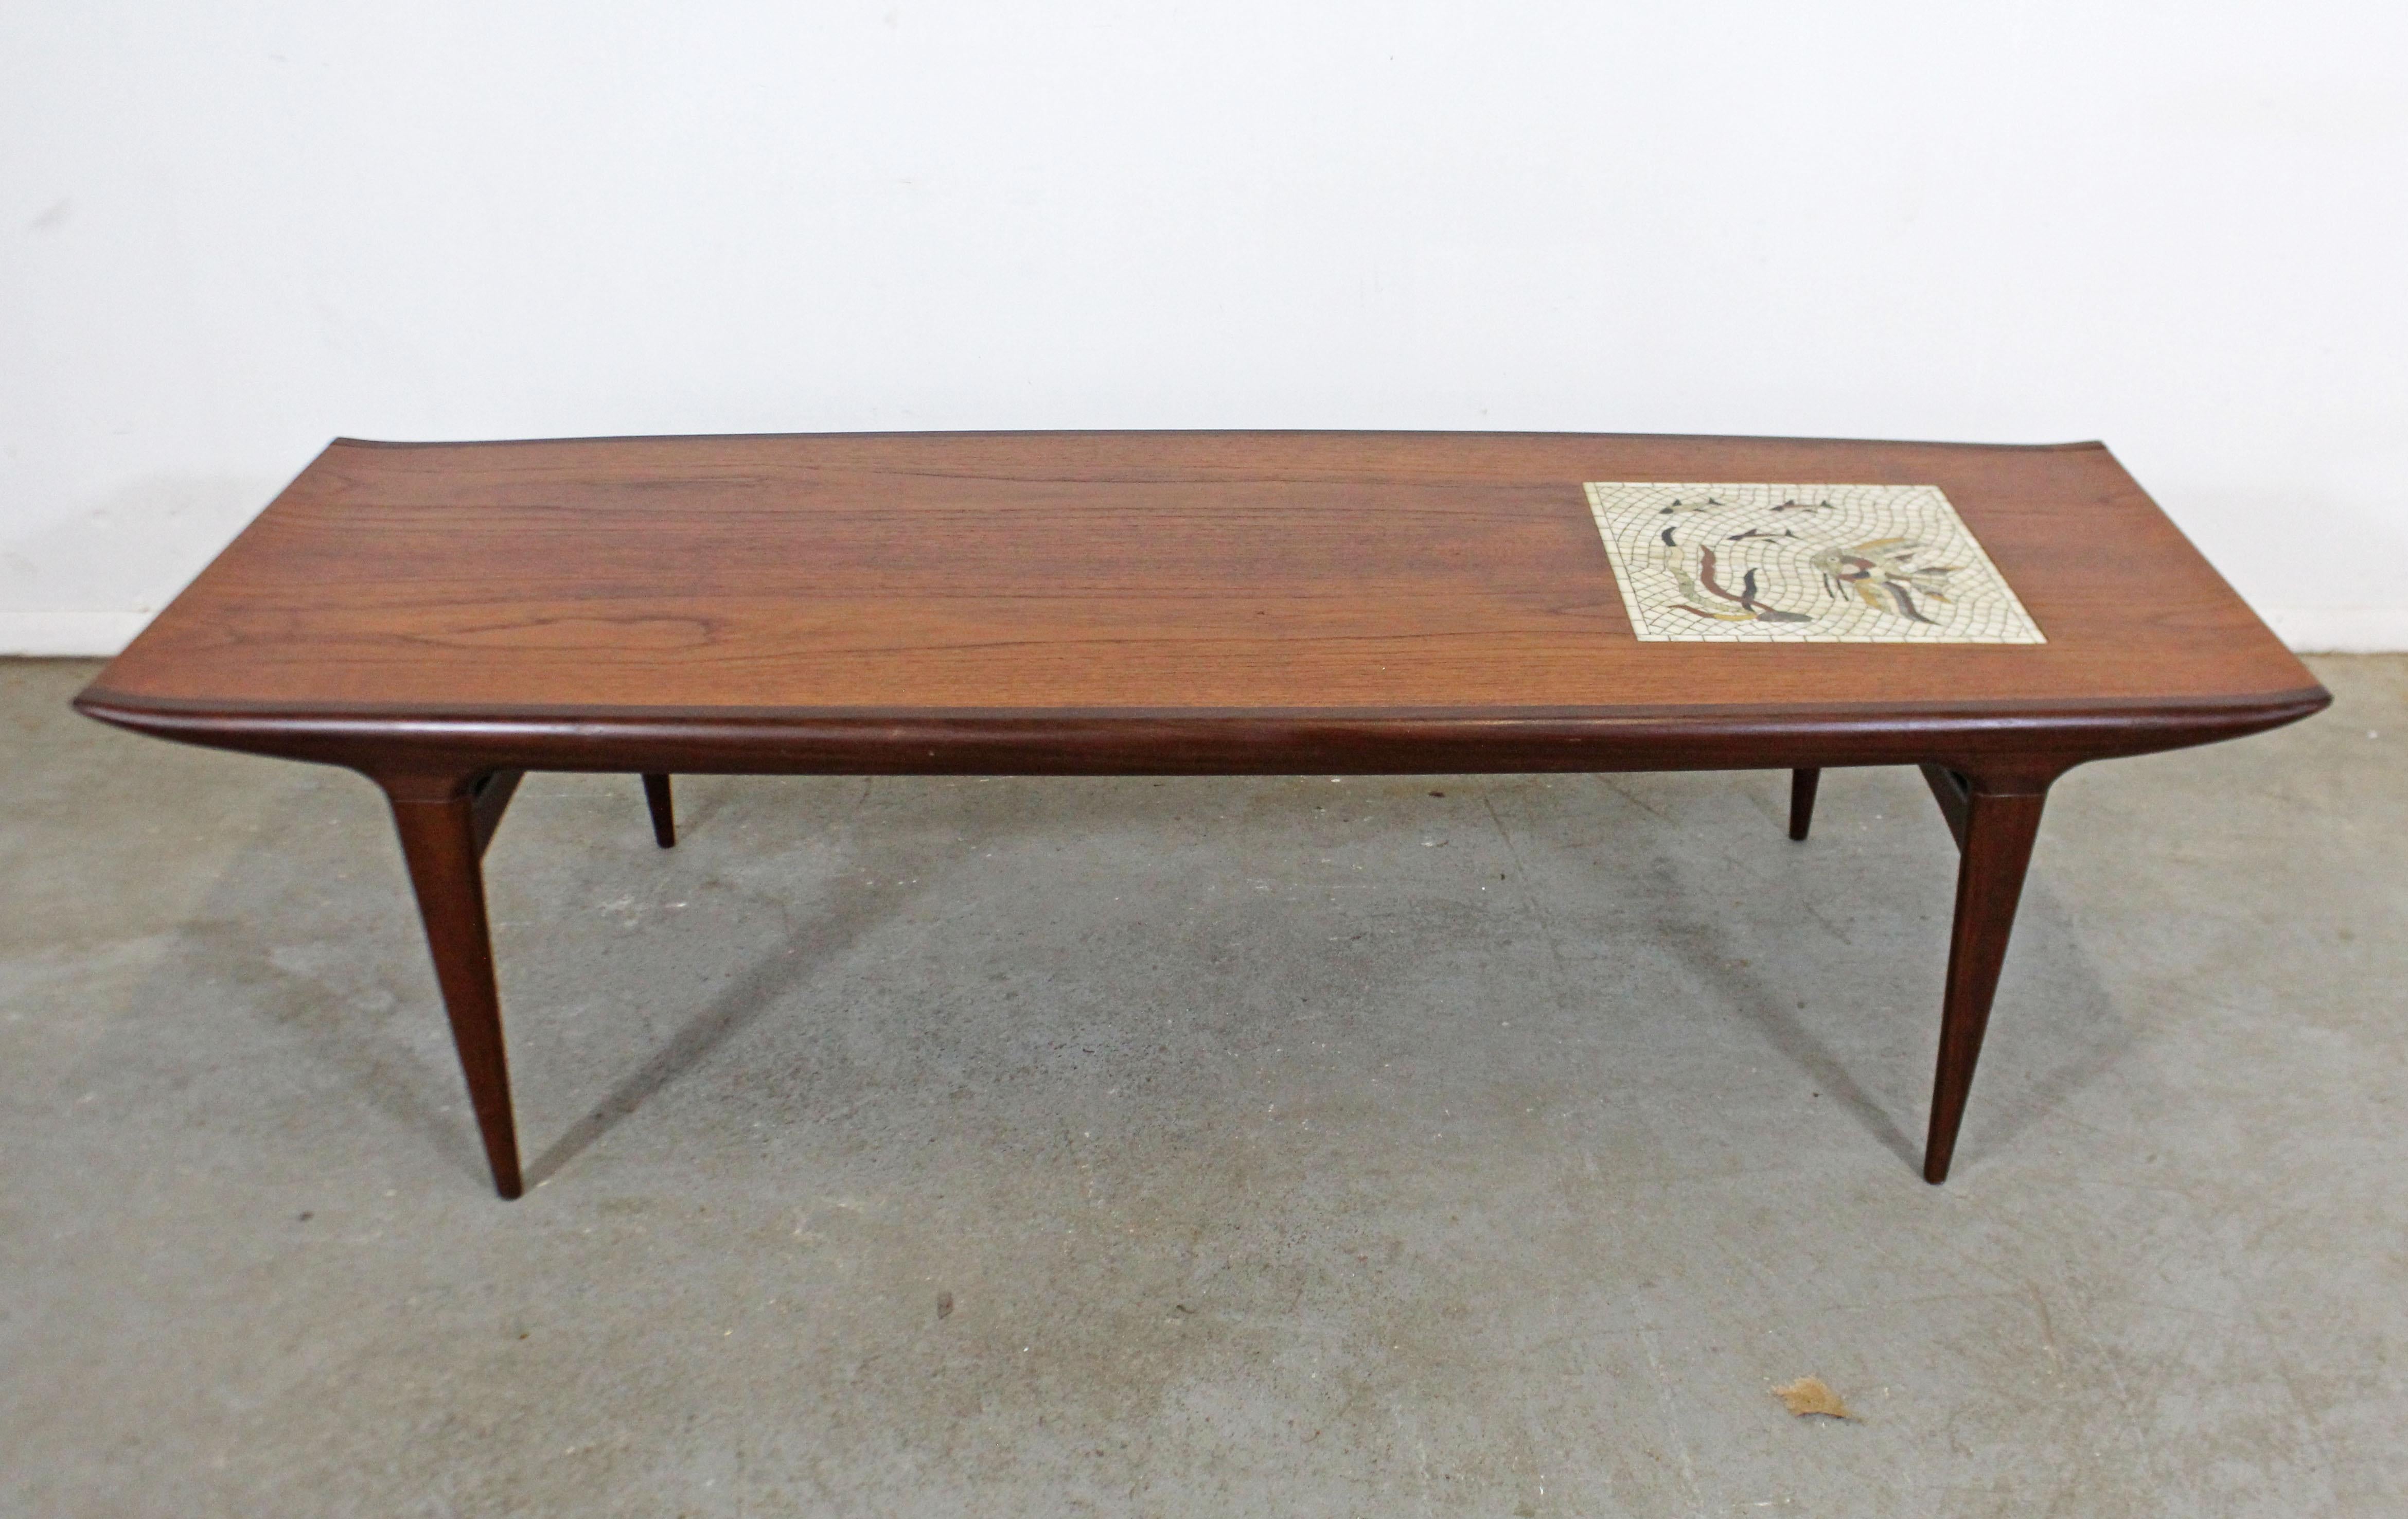 What a find! Offered is a vintage Danish modern teak coffee table with sculpted legs and top. Features a unique mosaic tile design on the tabletop with an underwater/Fish Design. It is in good condition with some age wear (see photos). It is signed